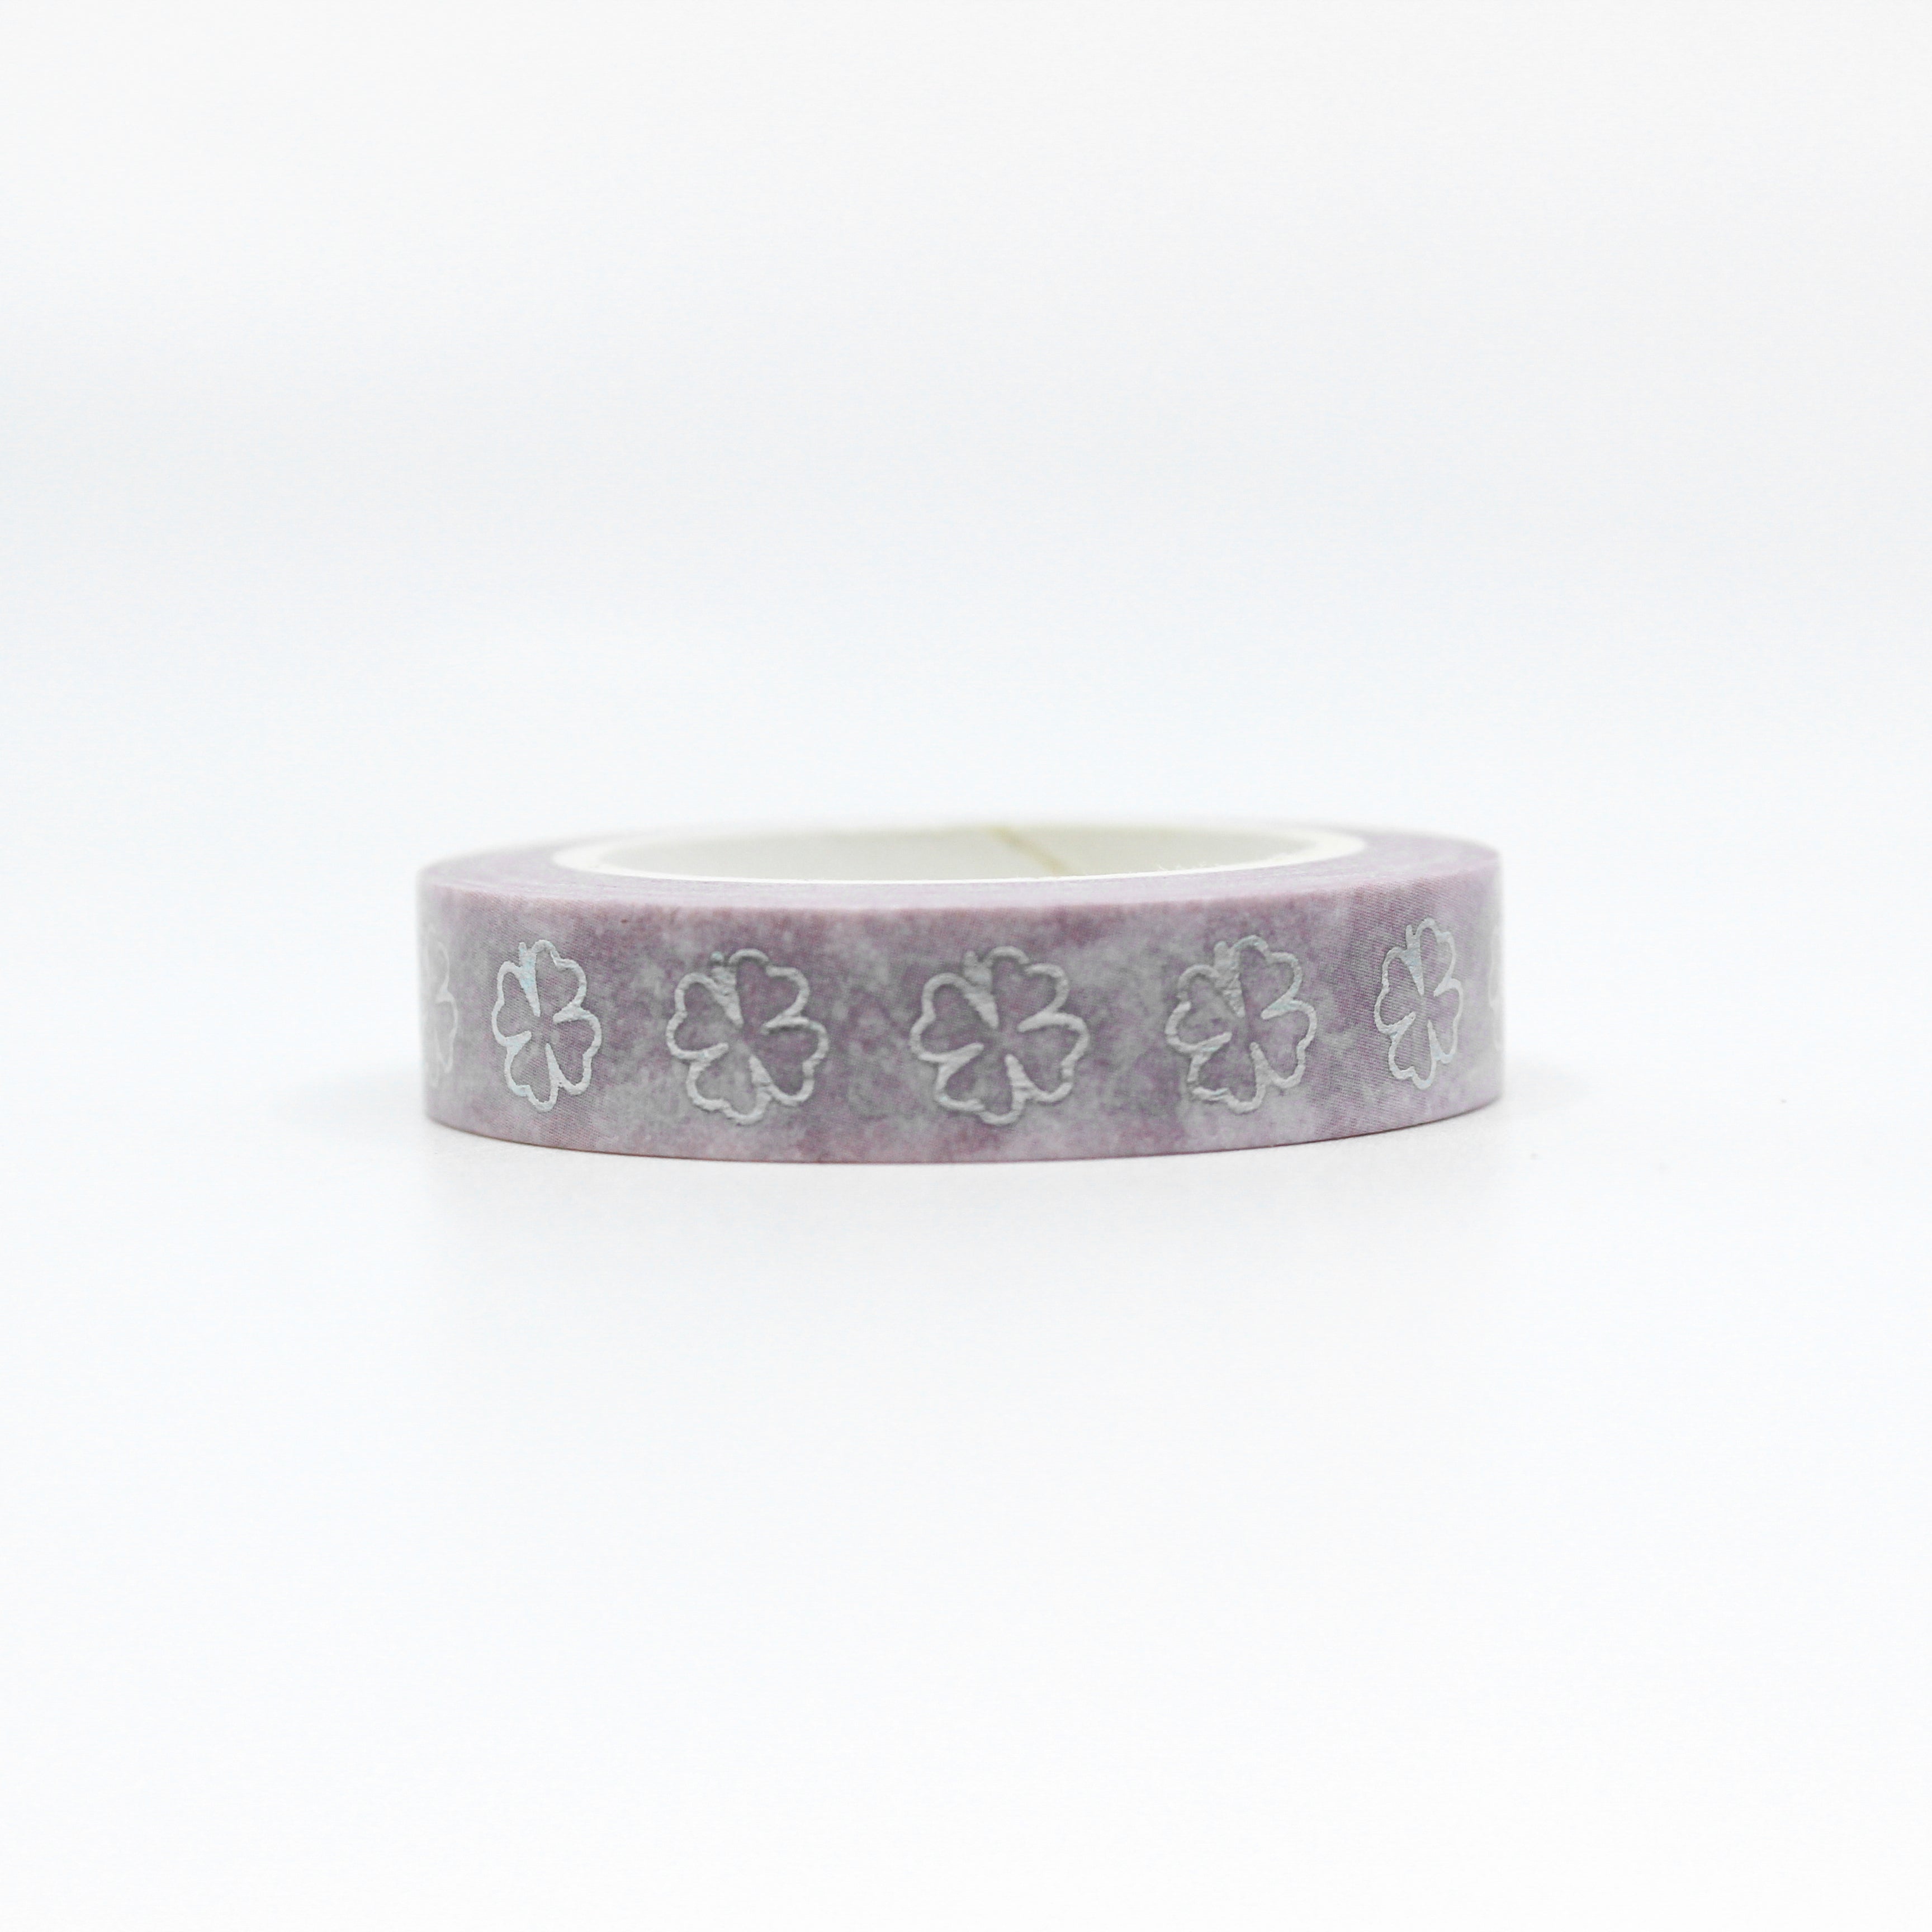 Purple & Silver Foil Clover Washi Tape: Add a touch of elegance and luck to your projects with this washi tape featuring a pattern of purple clovers accented with silver foil. Perfect for St. Patrick's Day or any project that needs a bit of charm. This tape is sold at BBB Supplies Craft Shop.